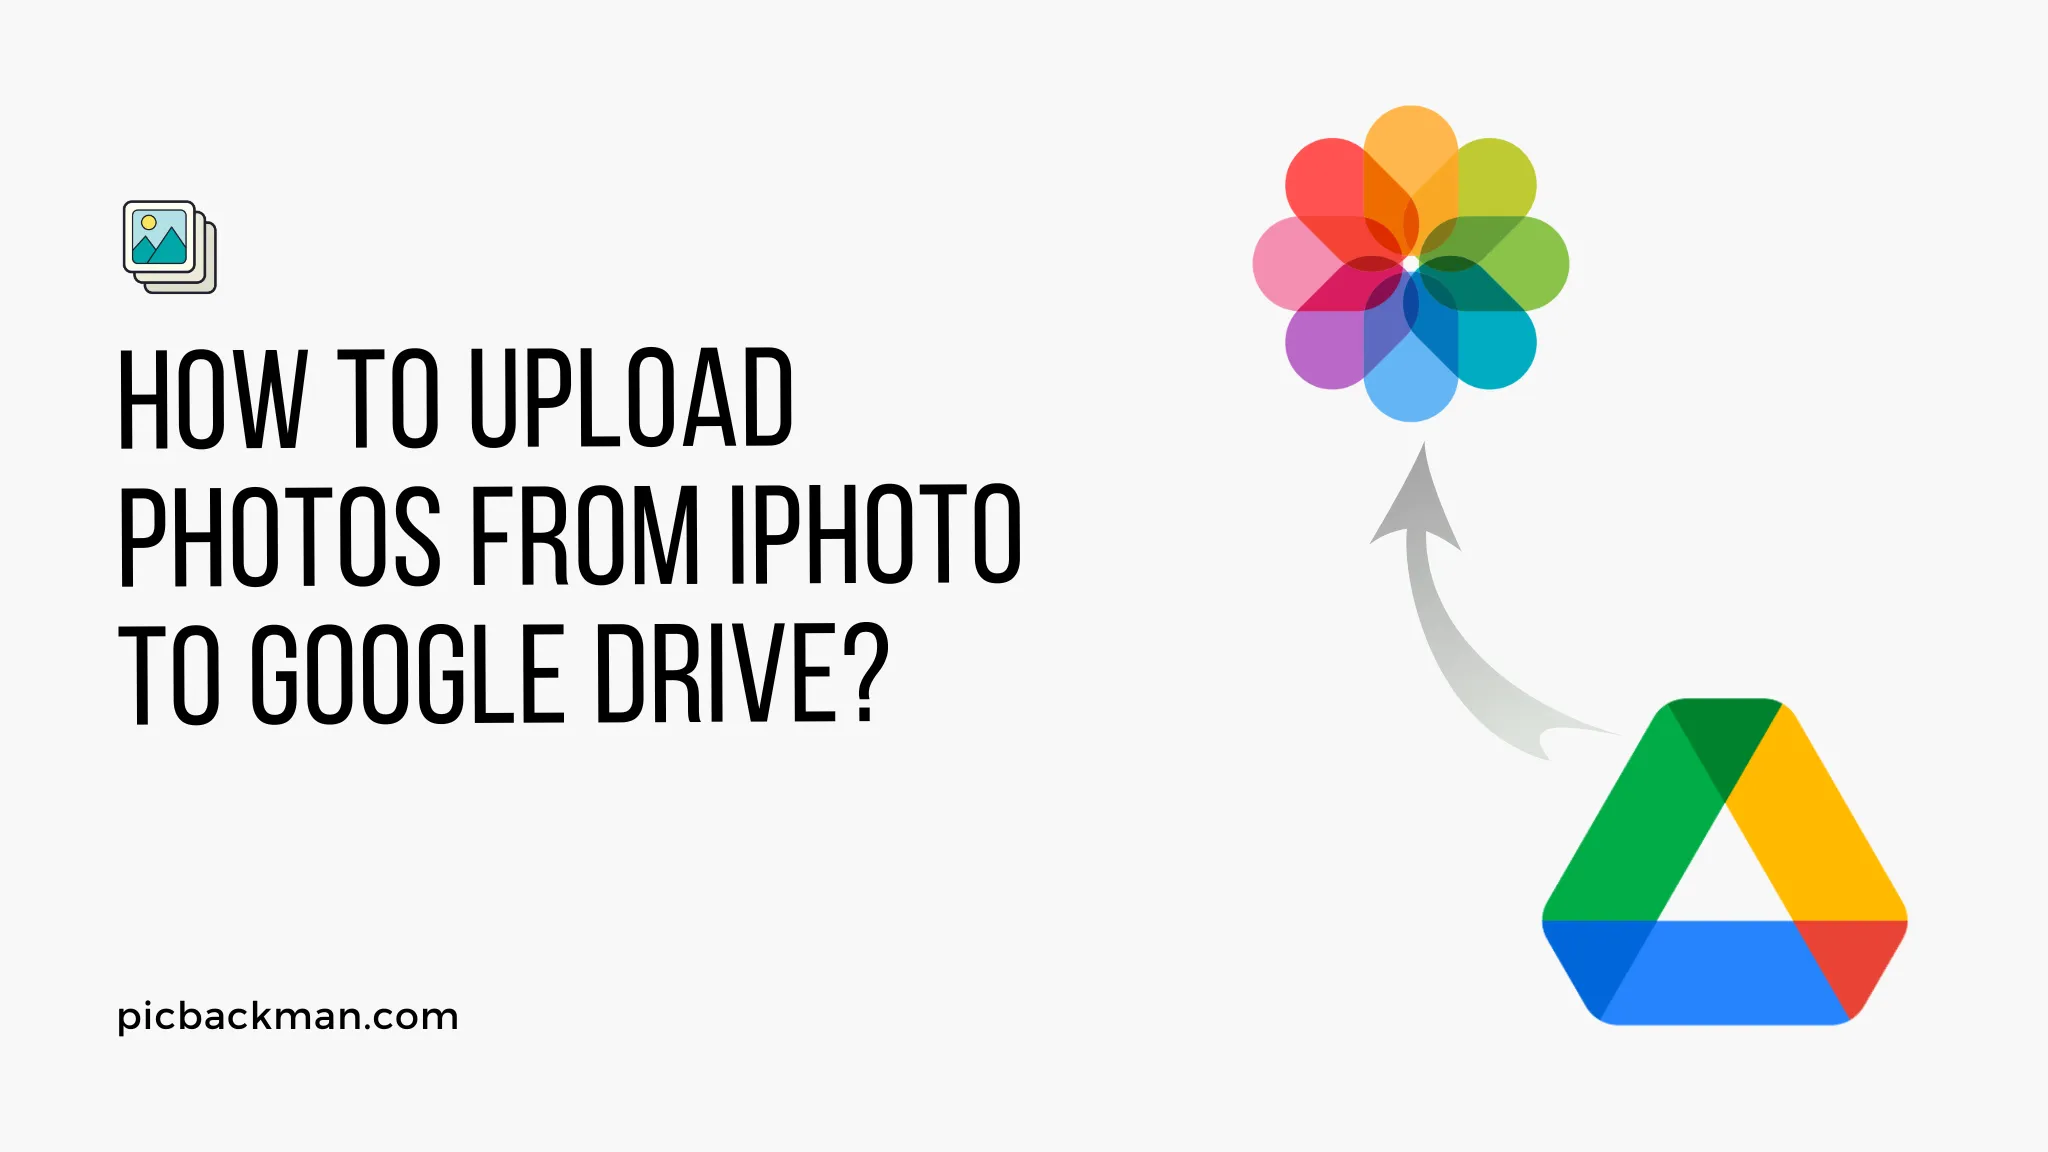 How to upload photos from iPhoto to Google Drive